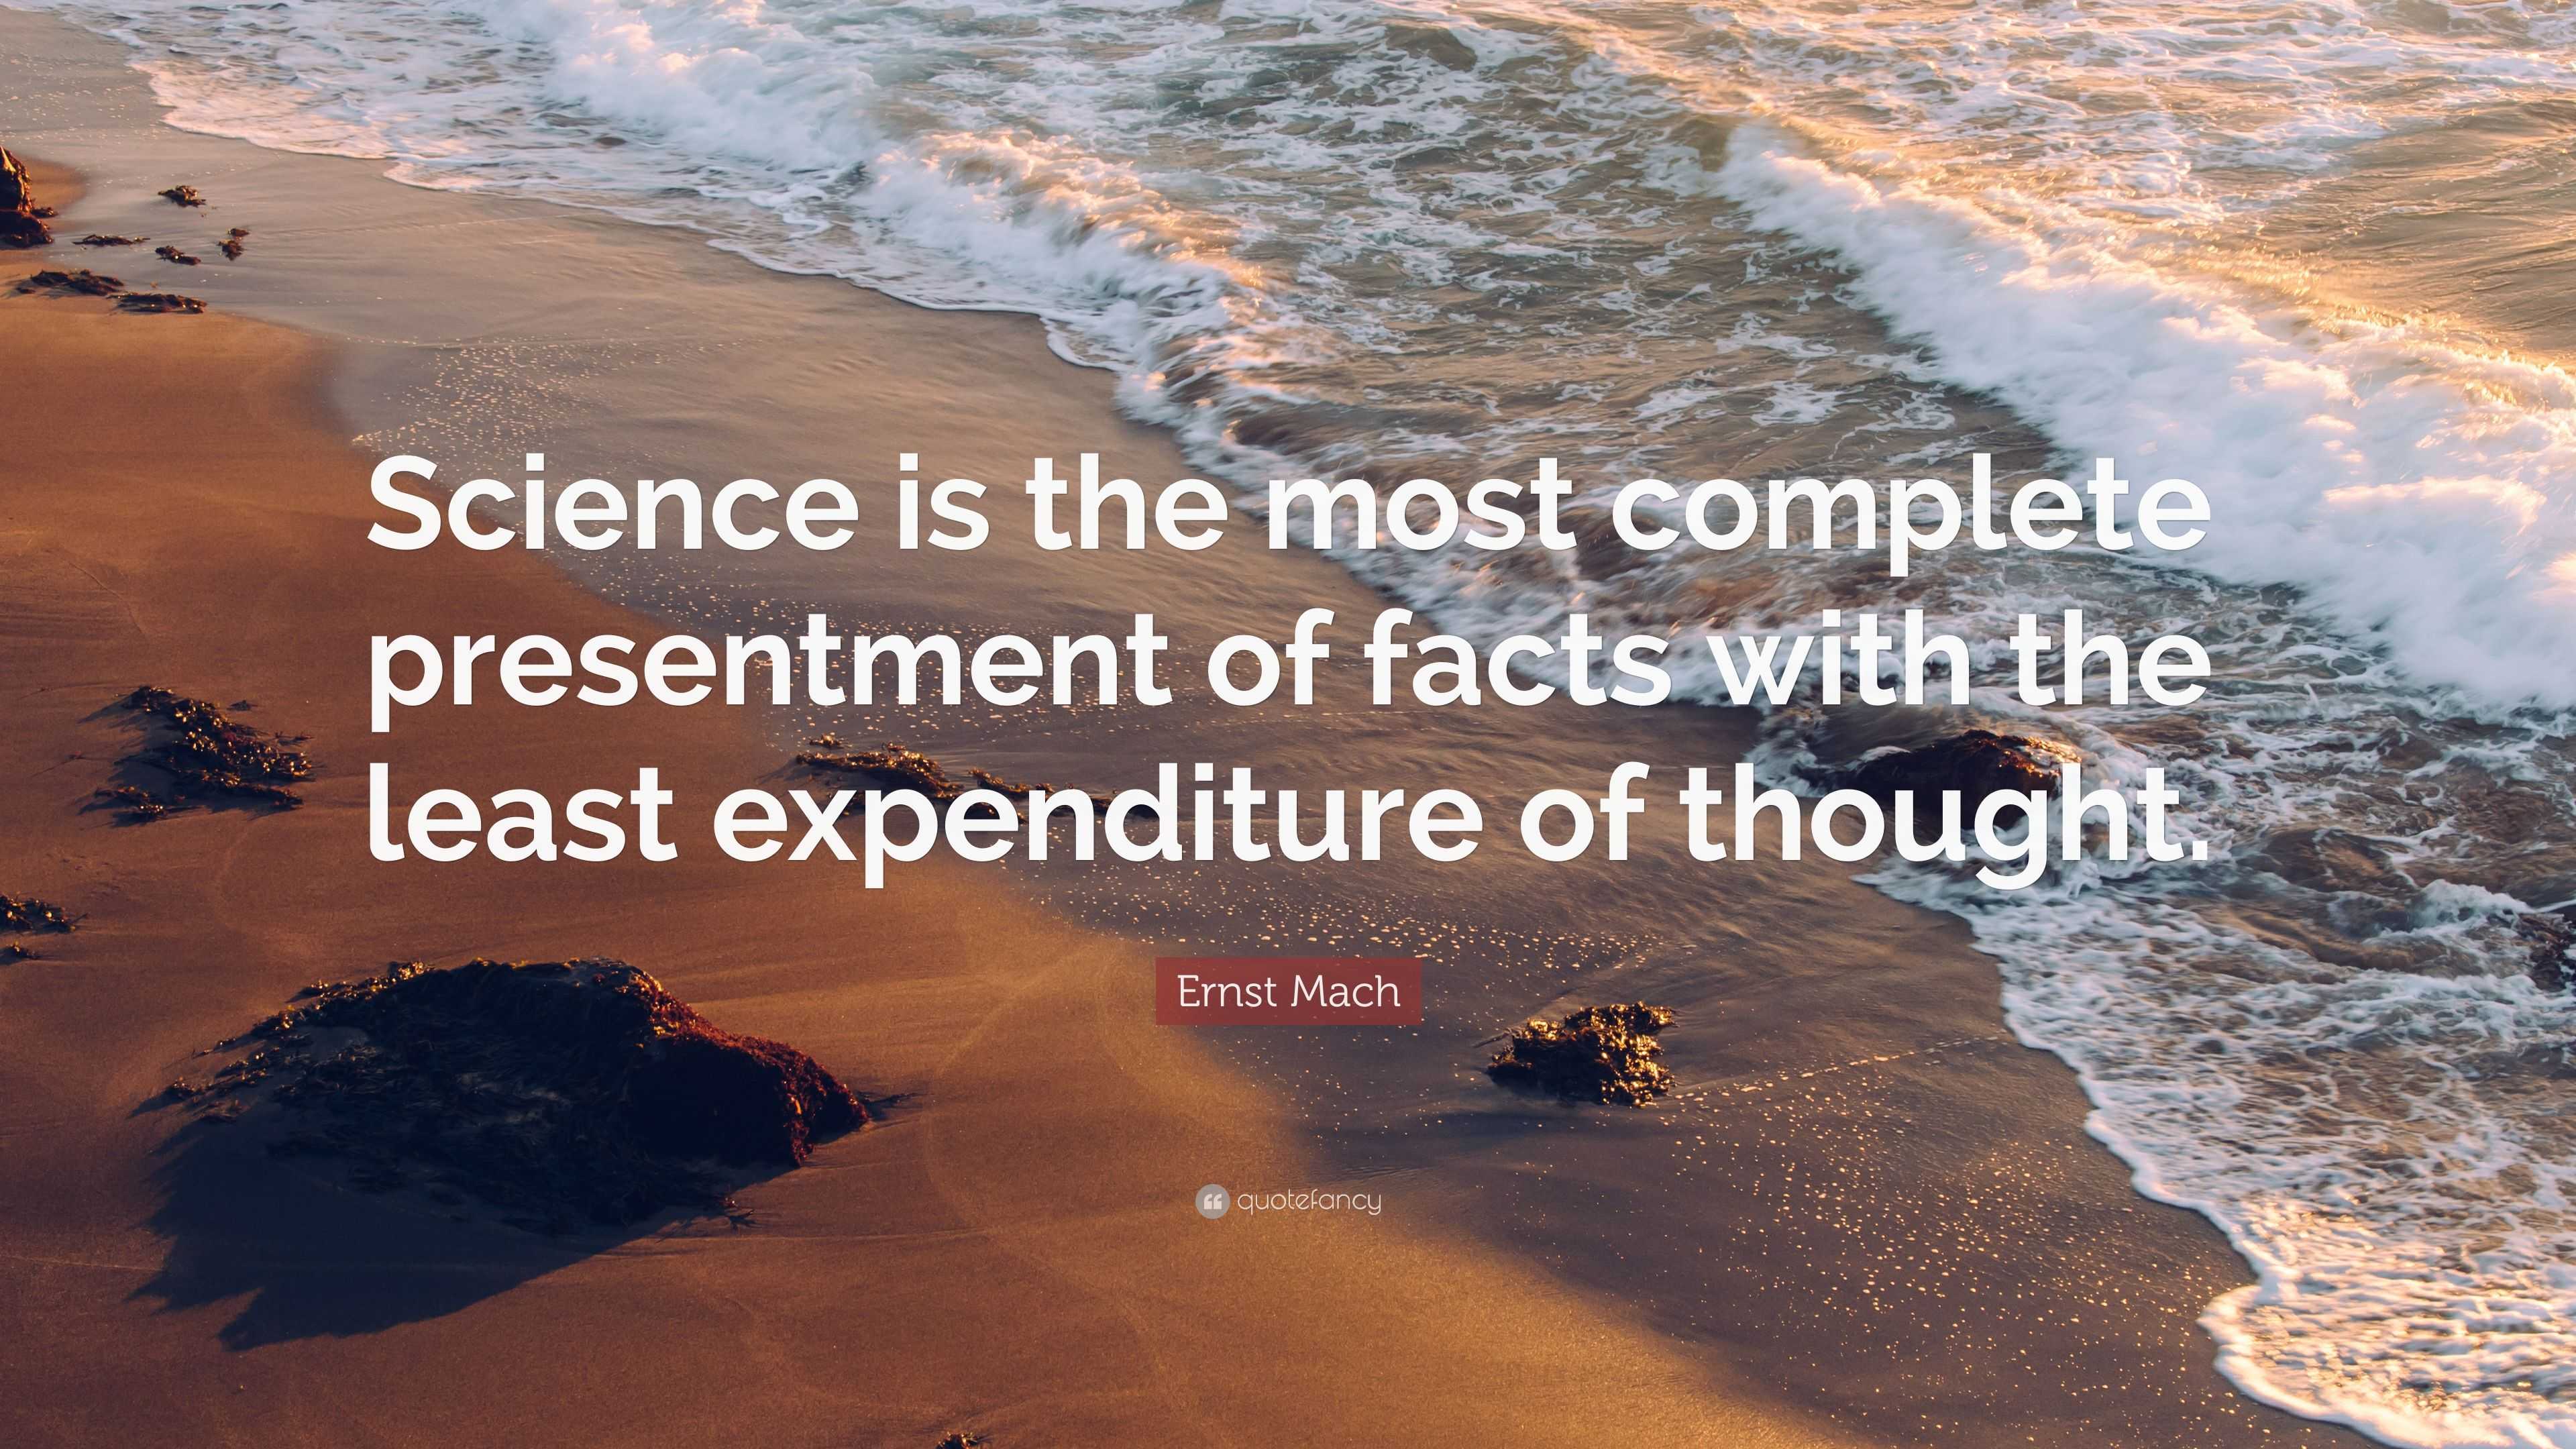 Ernst Mach Quote “science Is The Most Complete Presentment Of Facts With The Least Expenditure